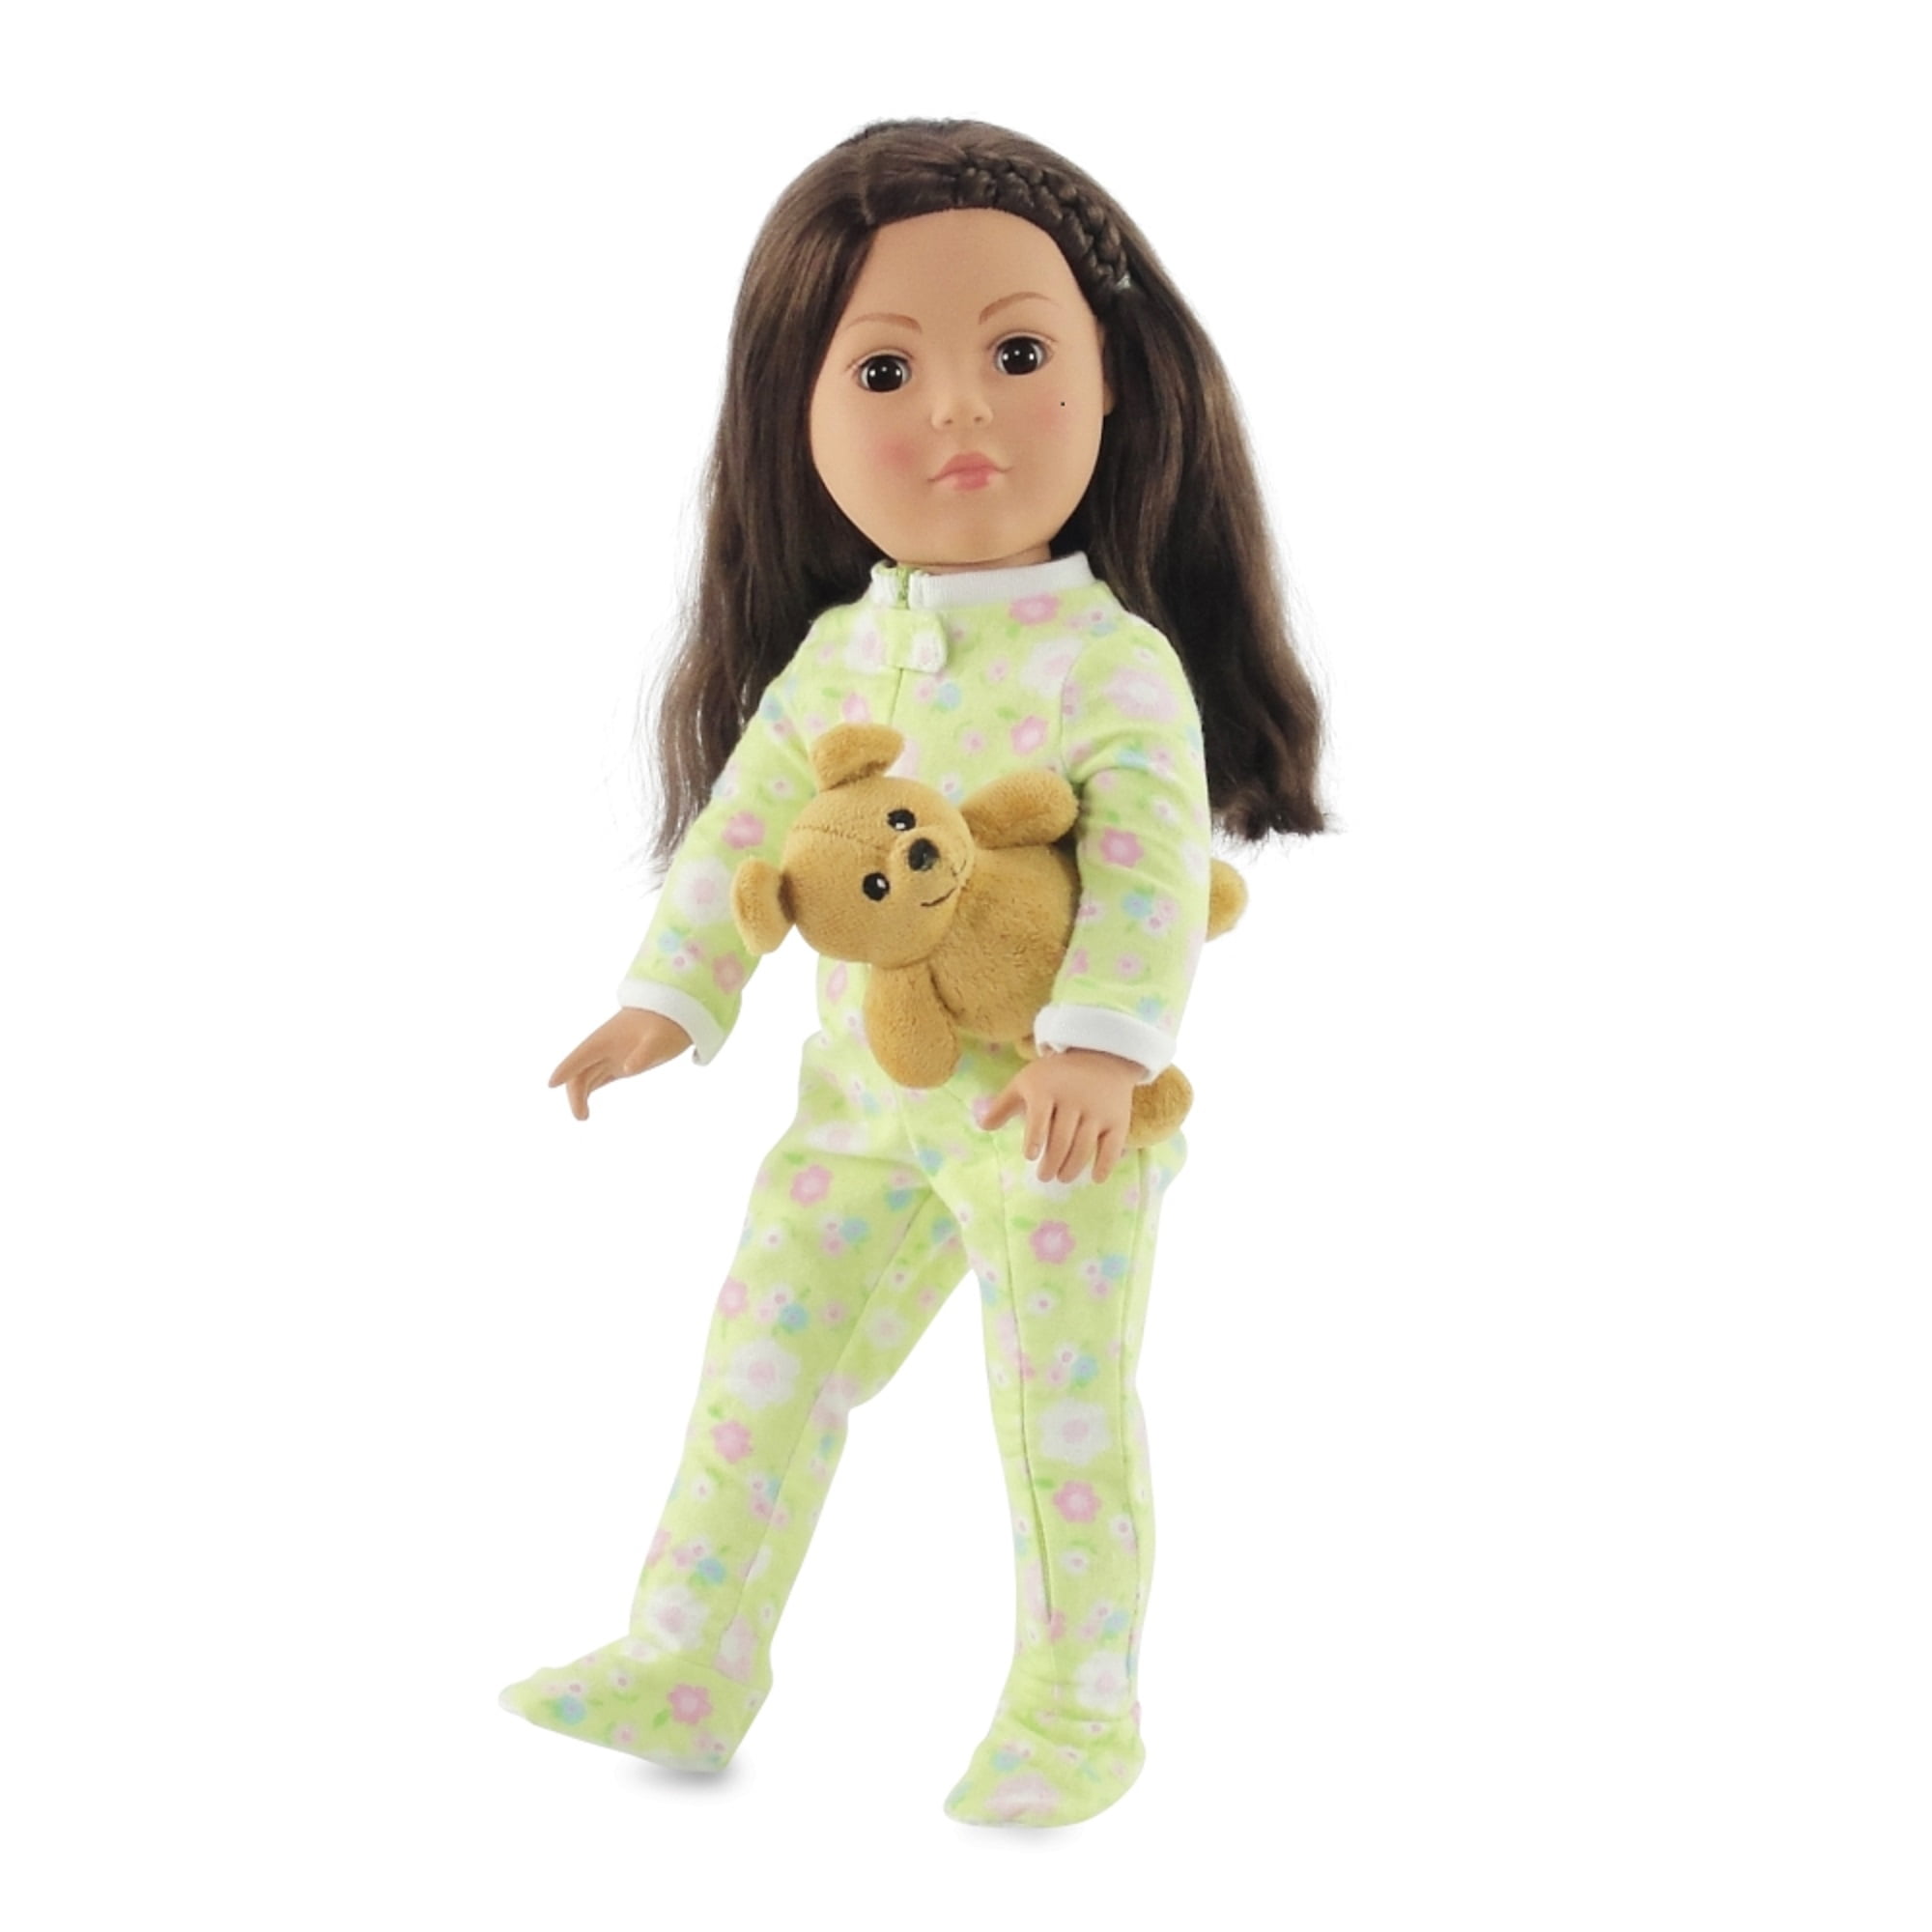 18”Doll Clothes Fit American Girl dolls aqua flannel two piece pajamas with rainbow print and white slippers